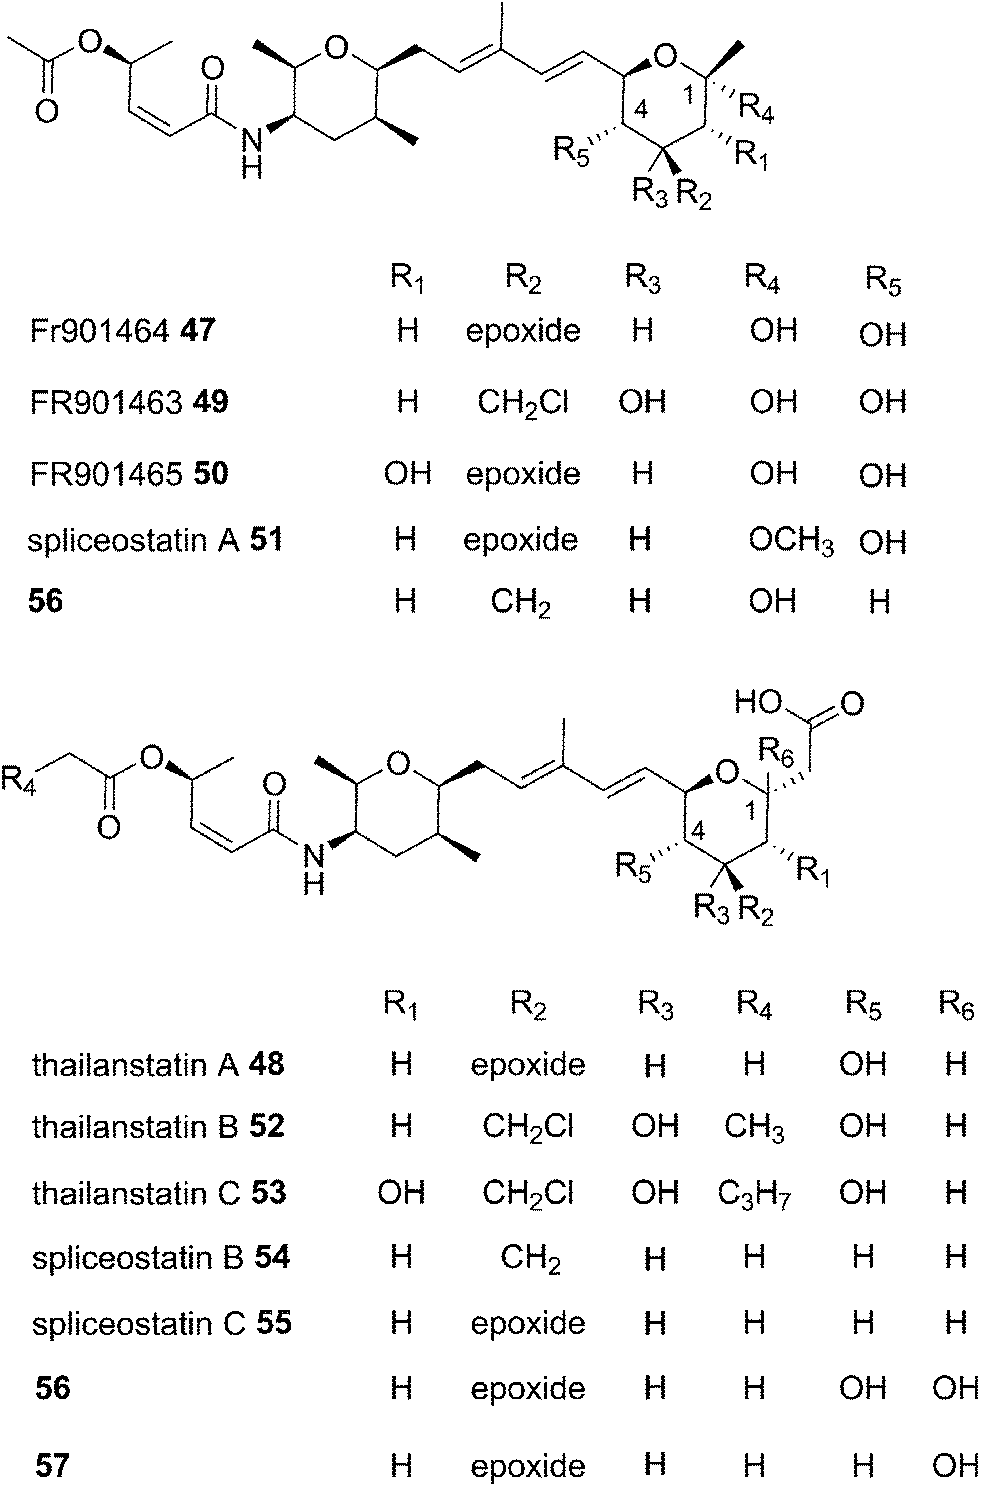 Biosynthesis of polyketides by trans -AT polyketide synthases 